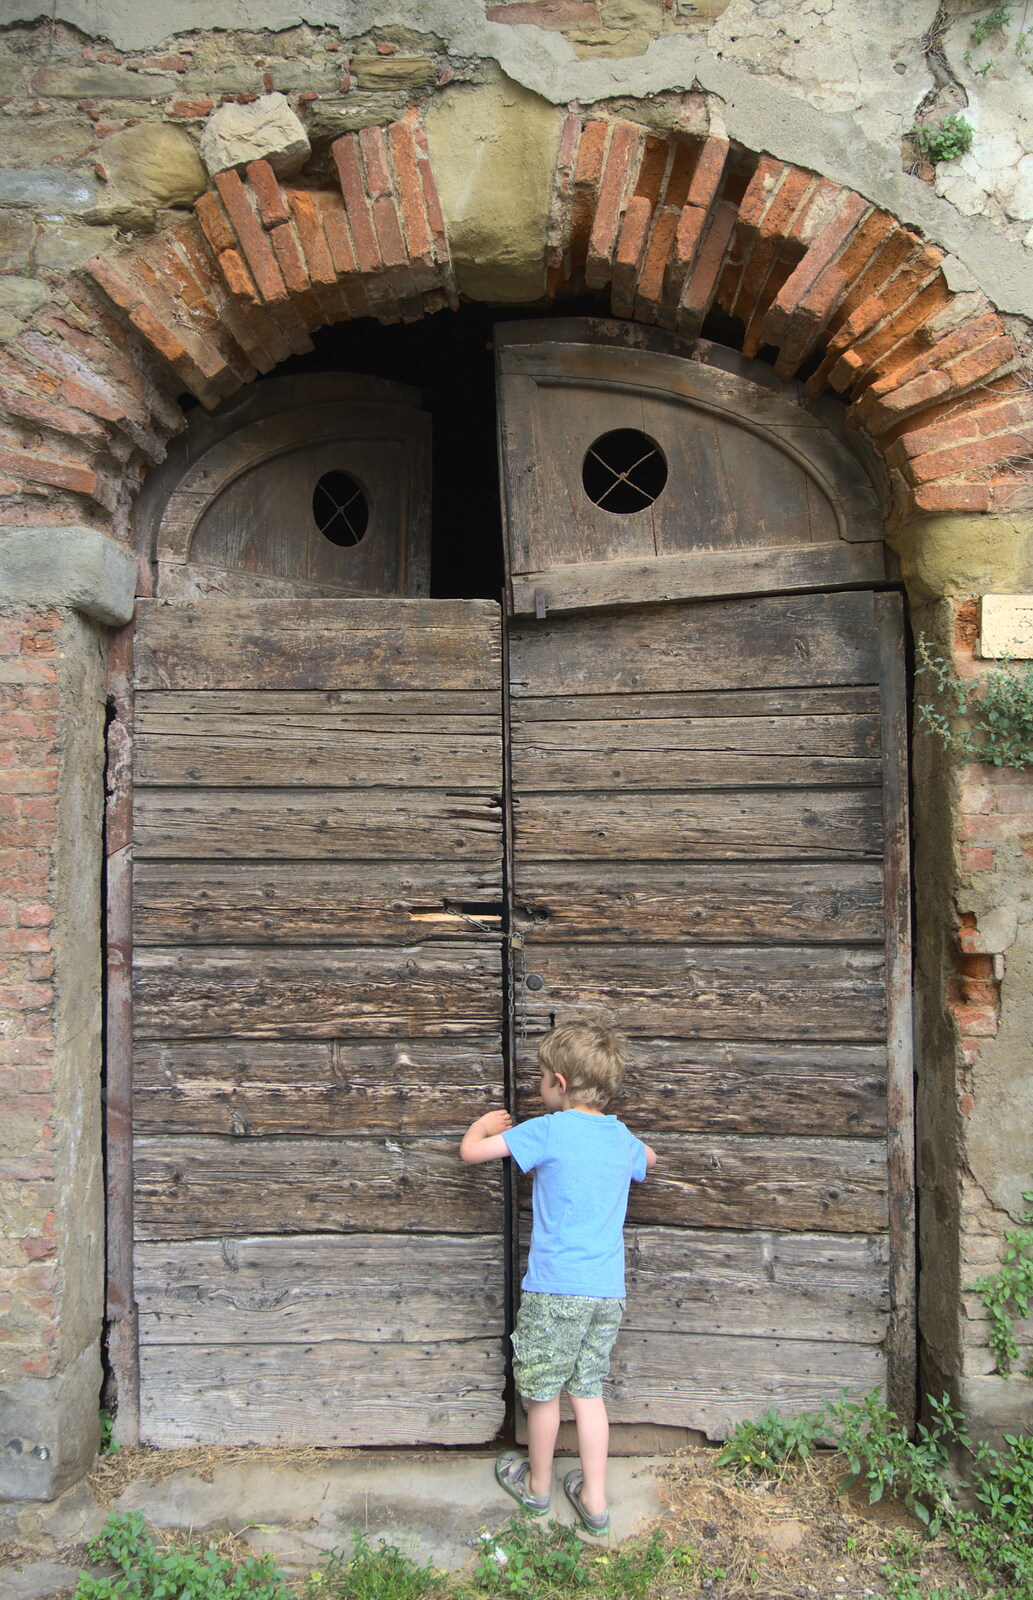 Marconi, Arezzo and the Sagra del Maccherone Festival, Battifolle, Tuscany - 9th June 2013: Fred inspects an old door